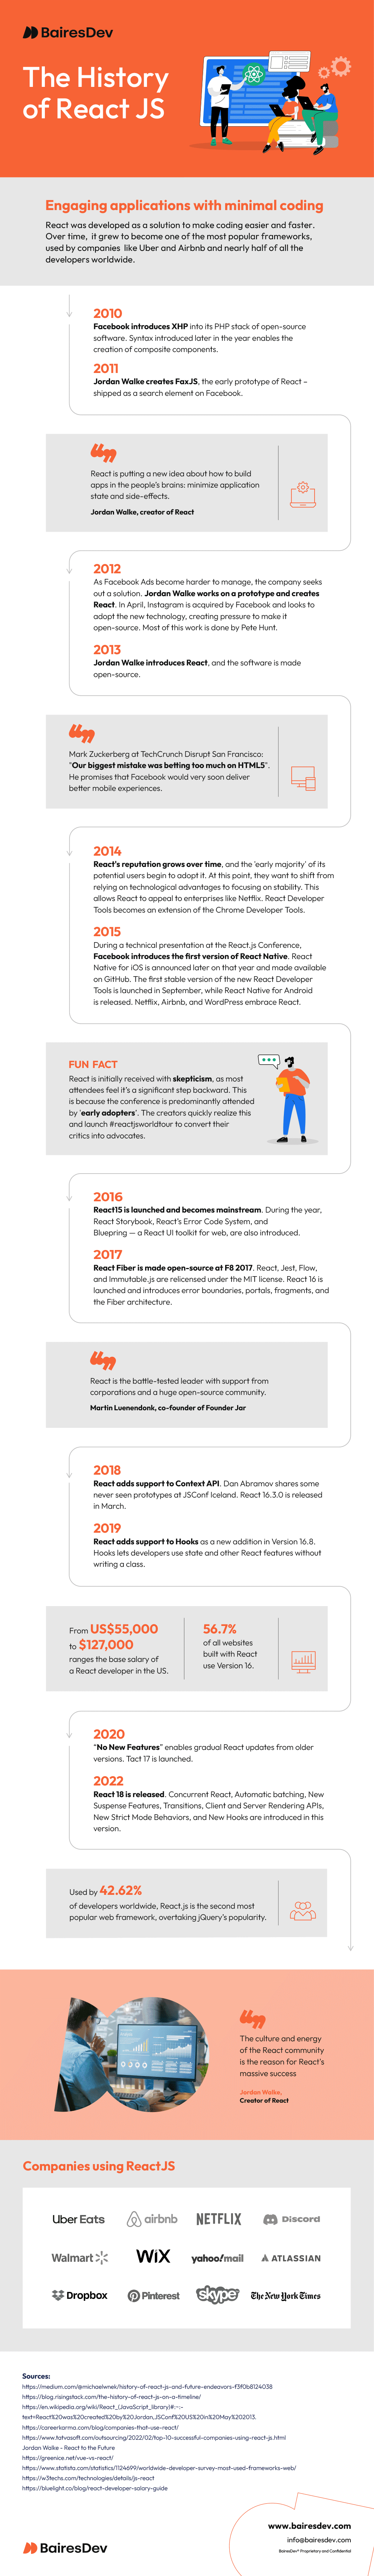 The History of React